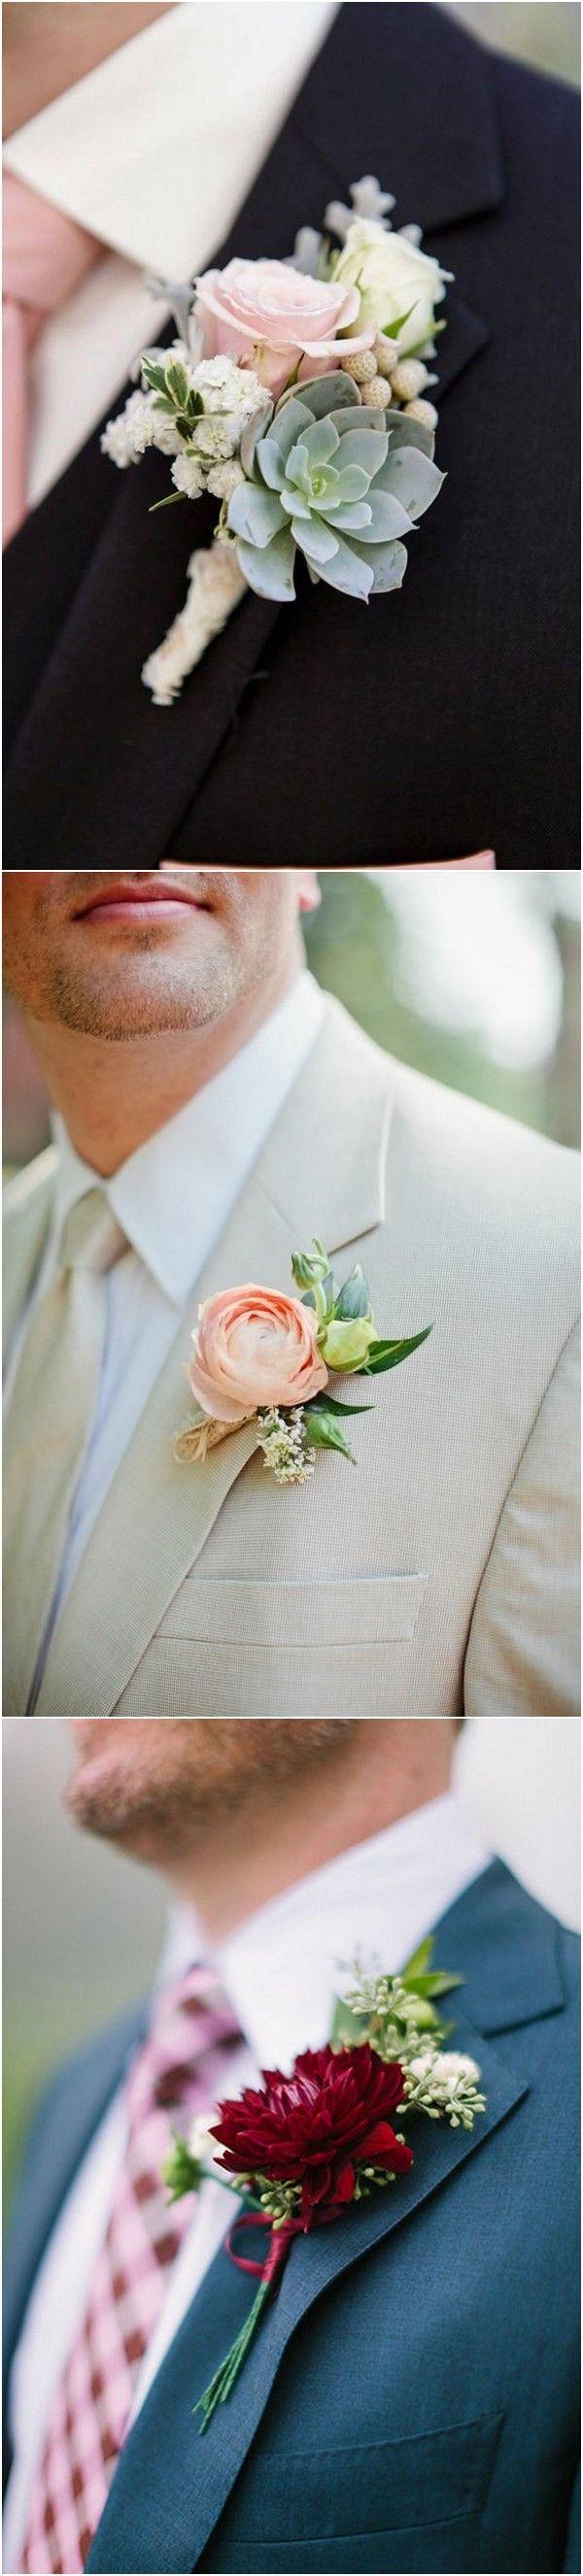 Mariage - 20 Fabulous Wedding Boutonnieres For Groom And Groomsmen - Page 2 Of 3